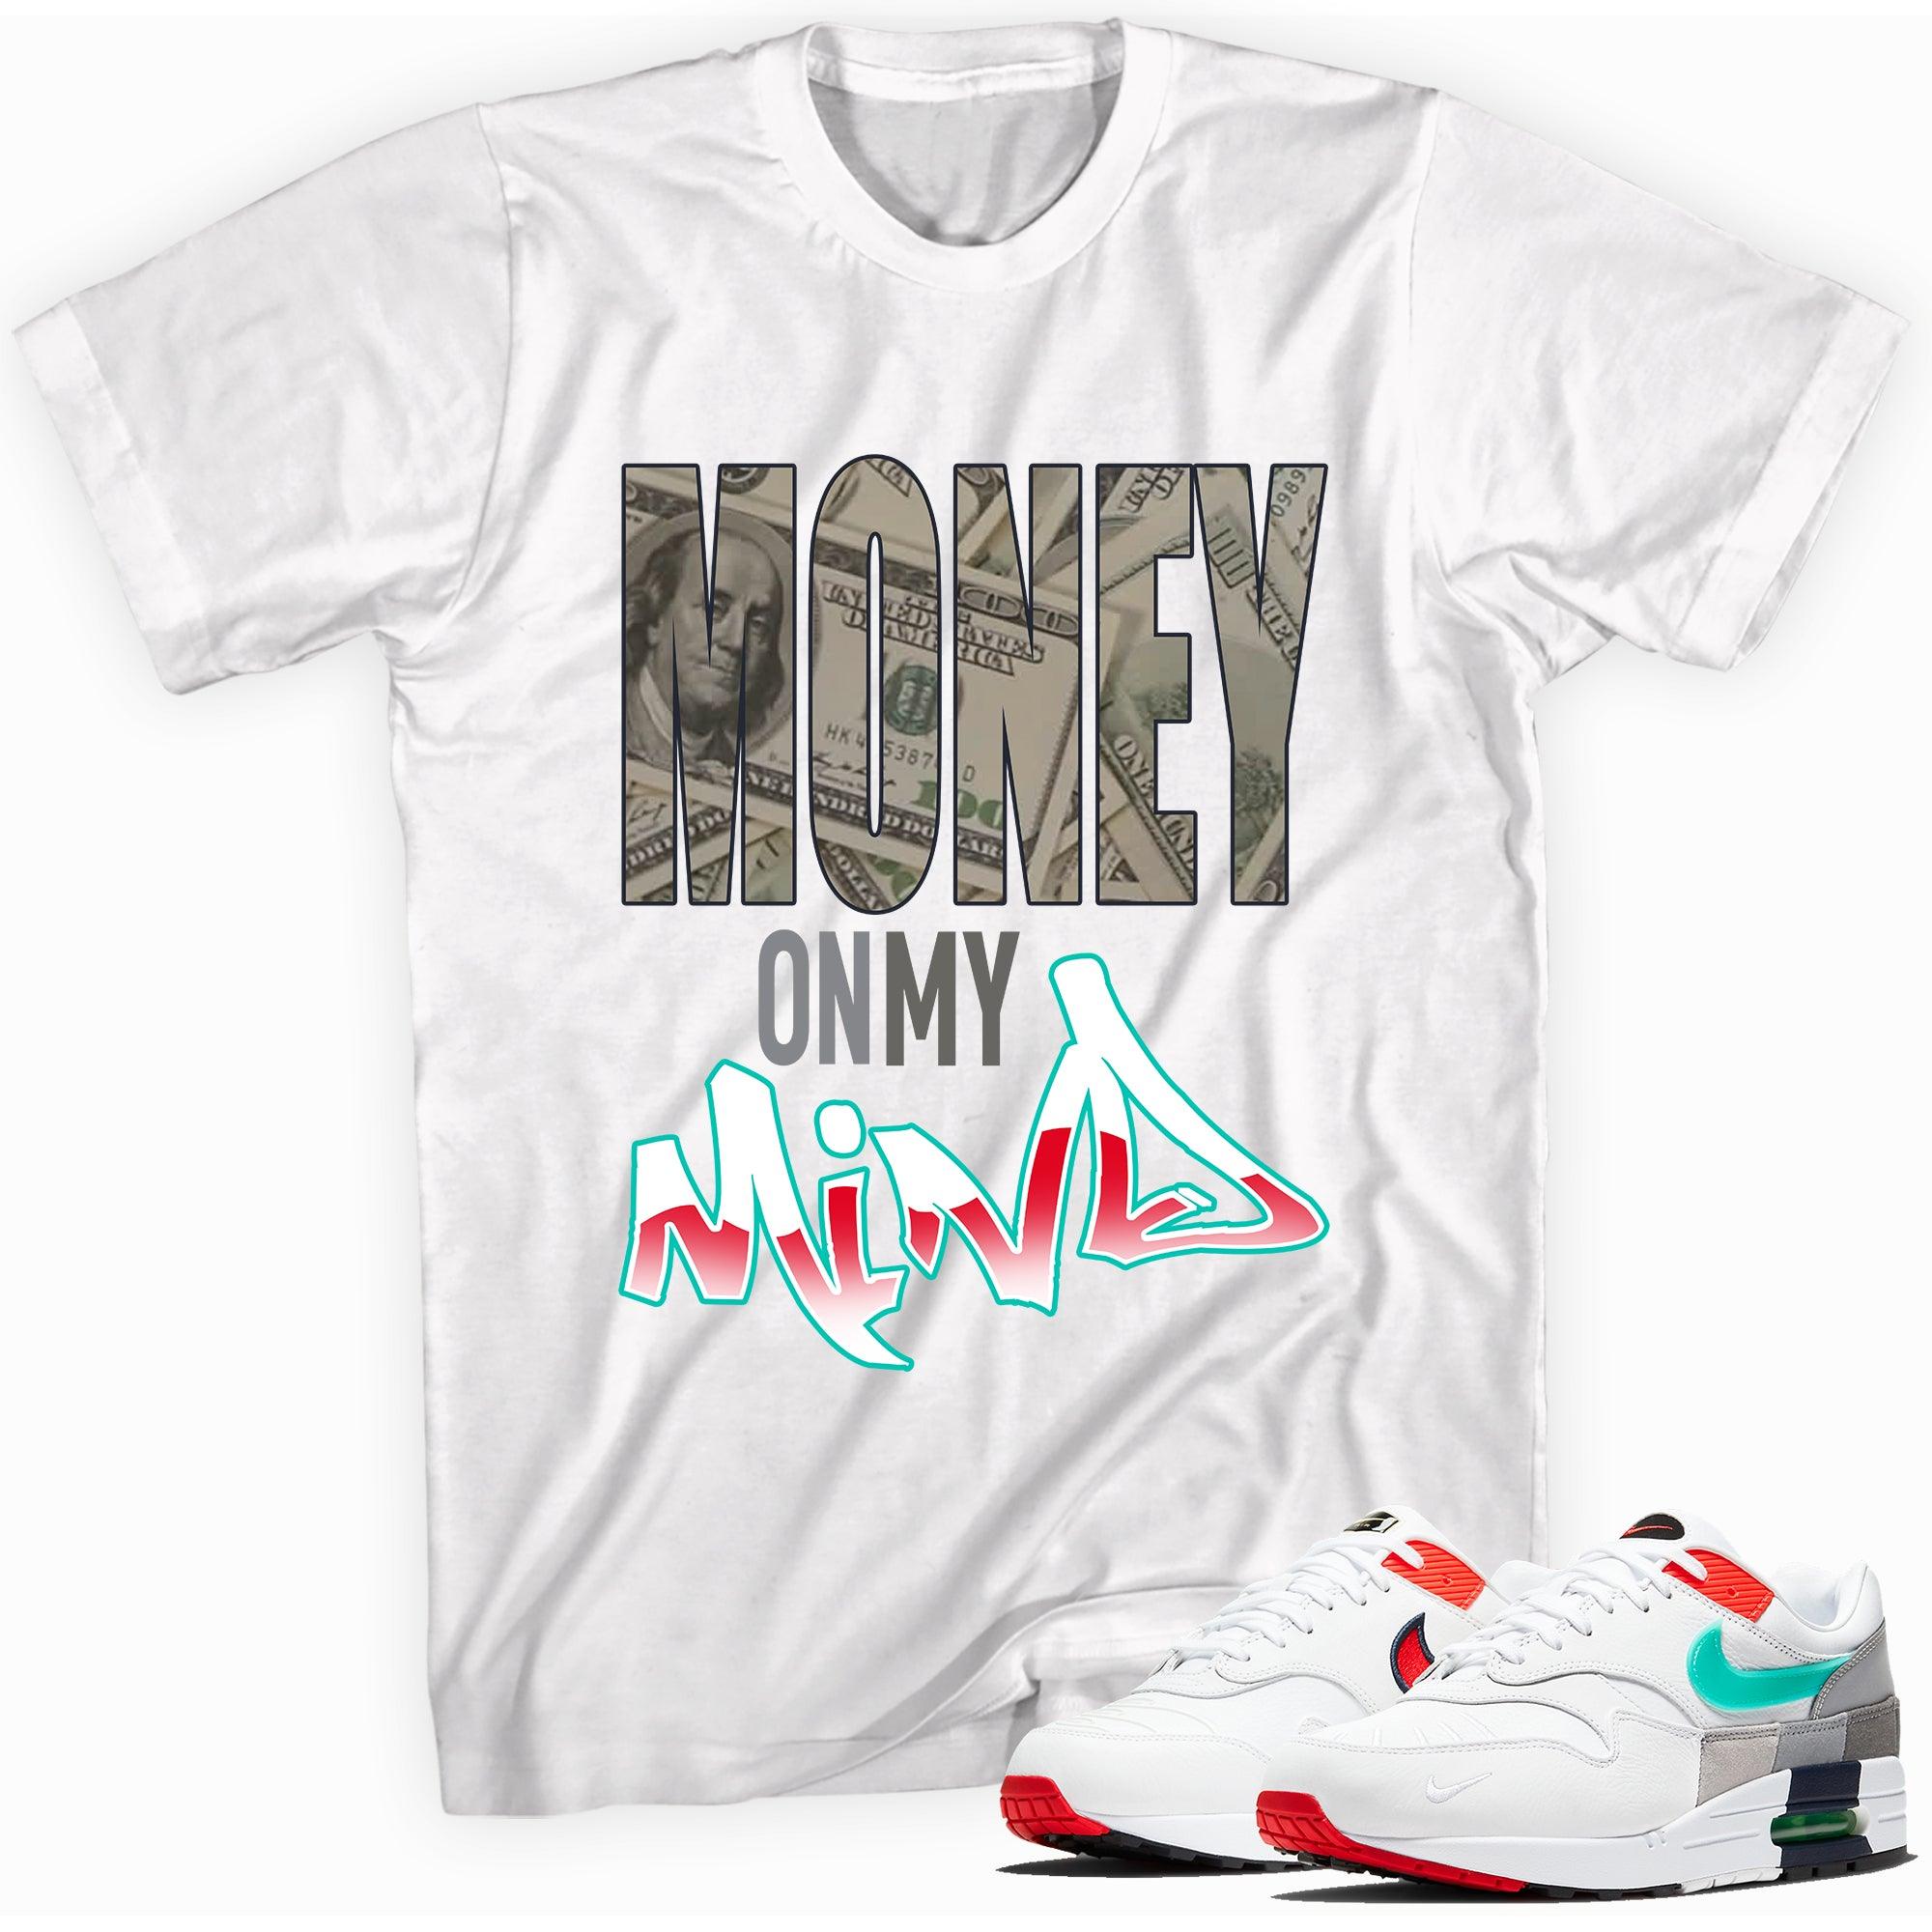 Money On My Mind Shirt Nike Air Max 1 Evolution Of Icons Sneakers photo